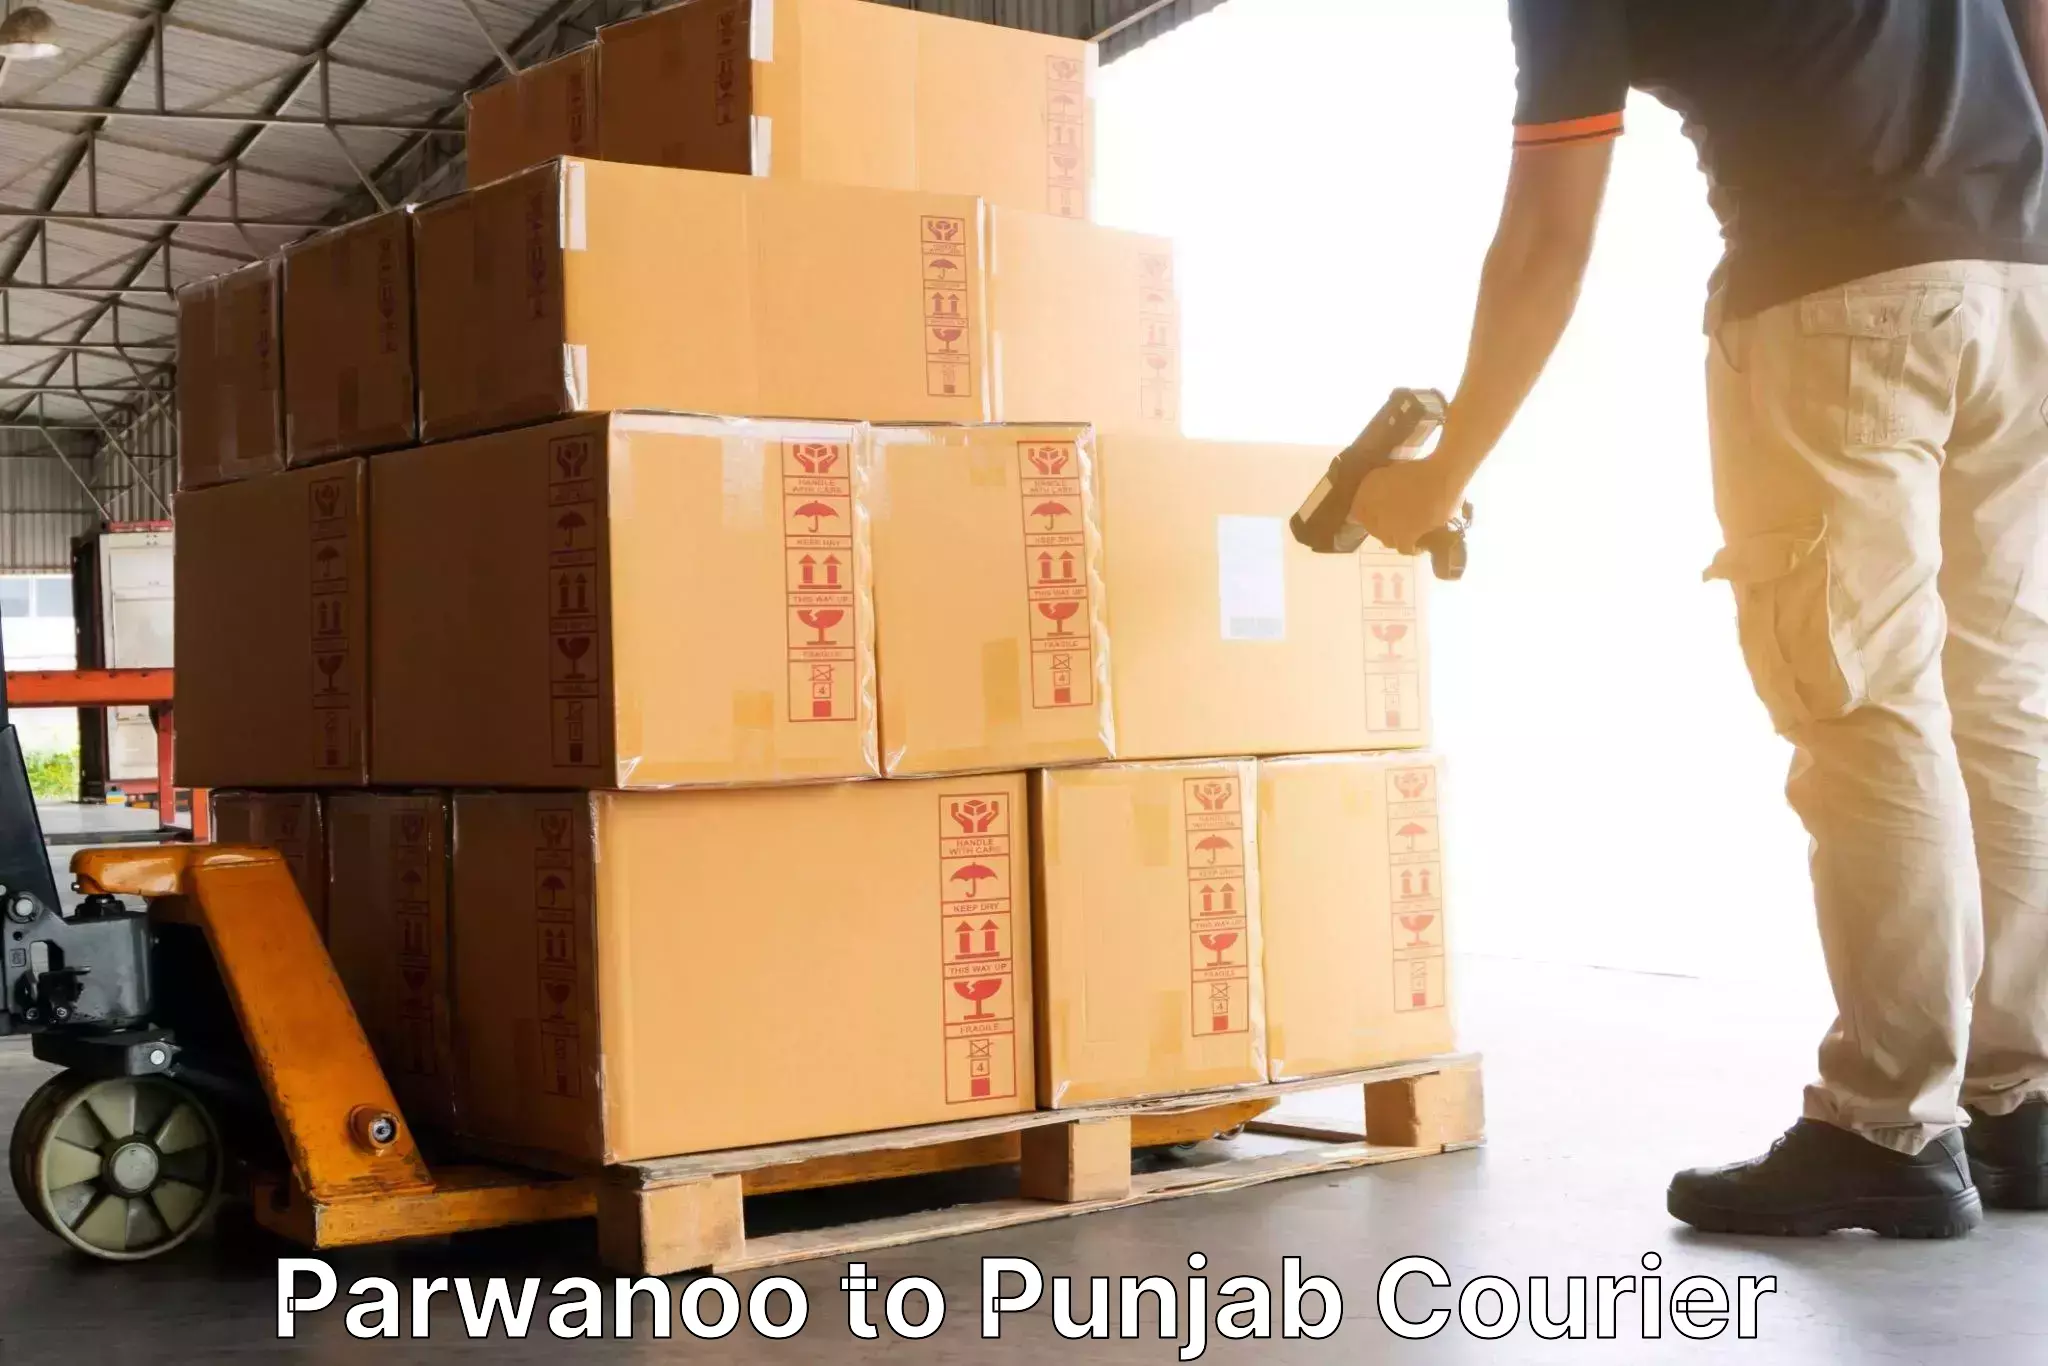 Fastest parcel delivery Parwanoo to Mohali